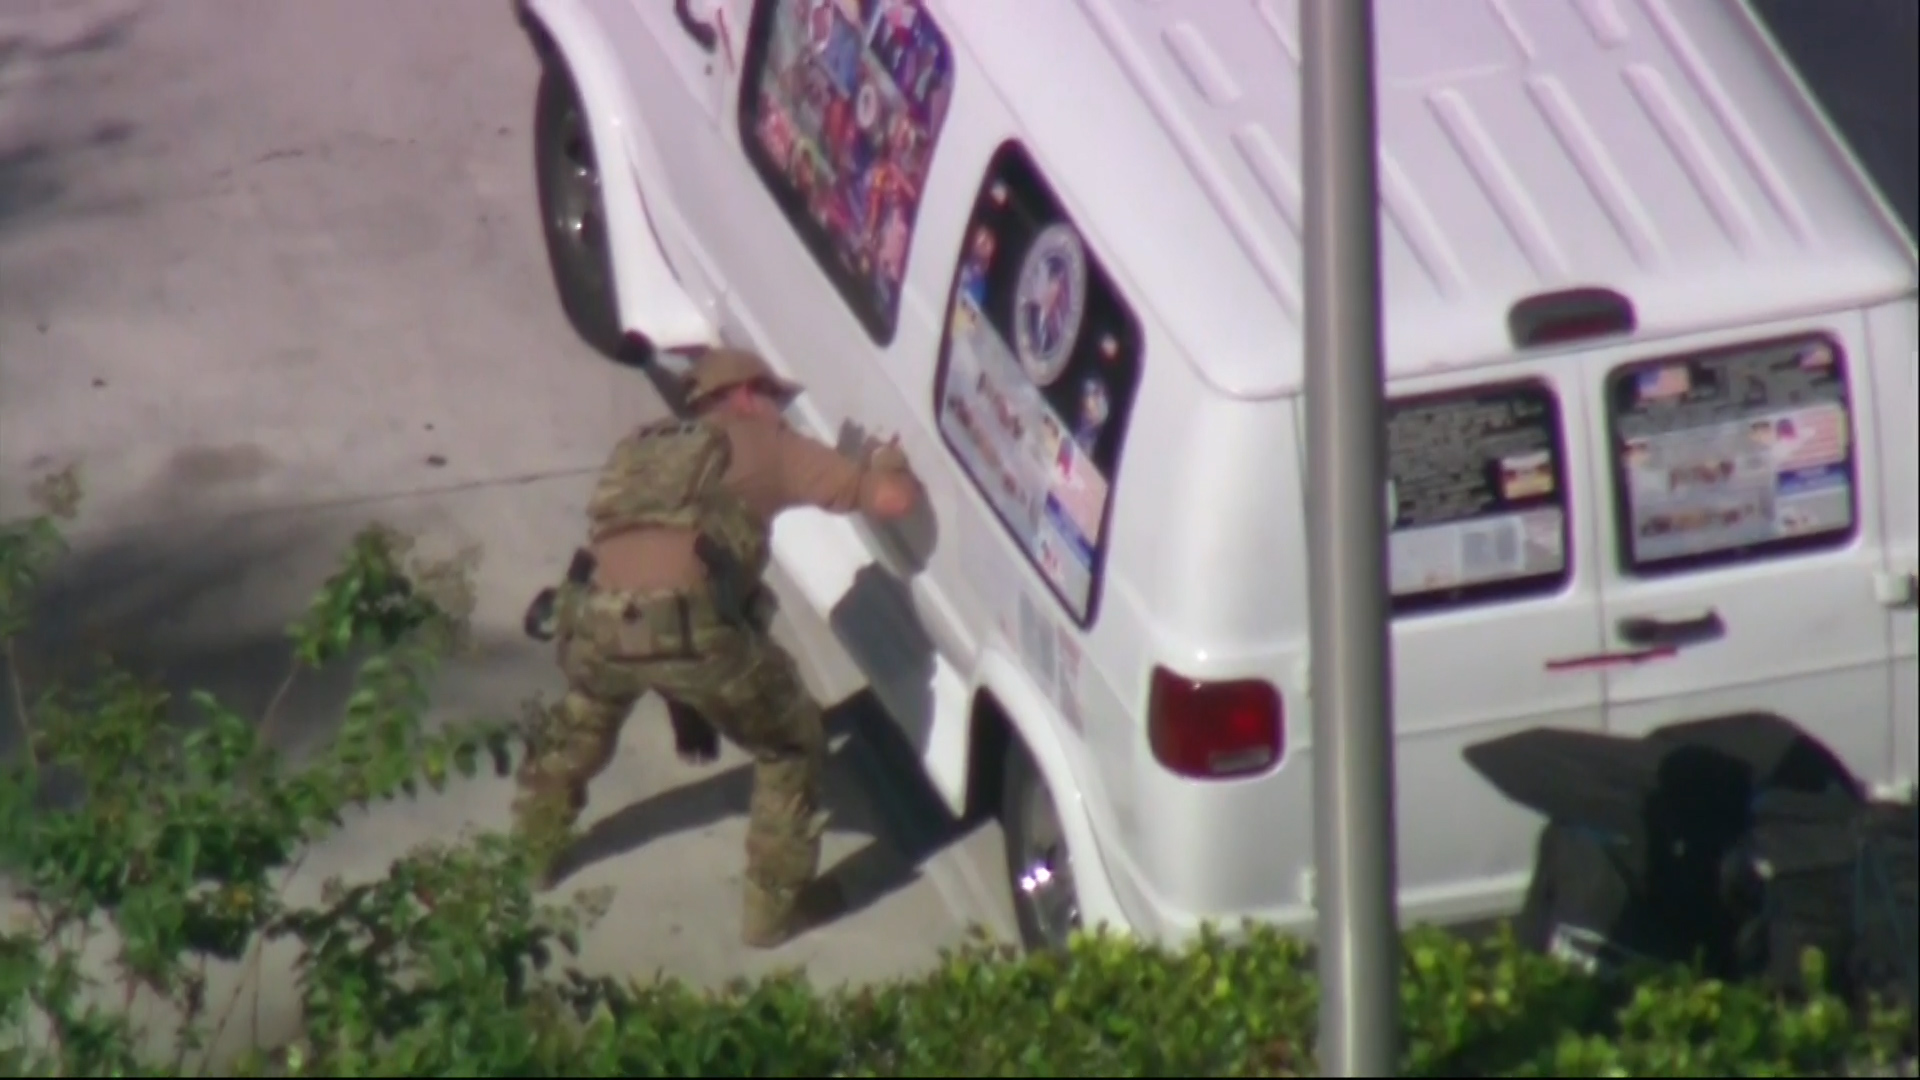 Authorities are seen in Plantation, Florida taking a man into custody in connection to the mailed package bombs. (Photo Courtesy WPLG)